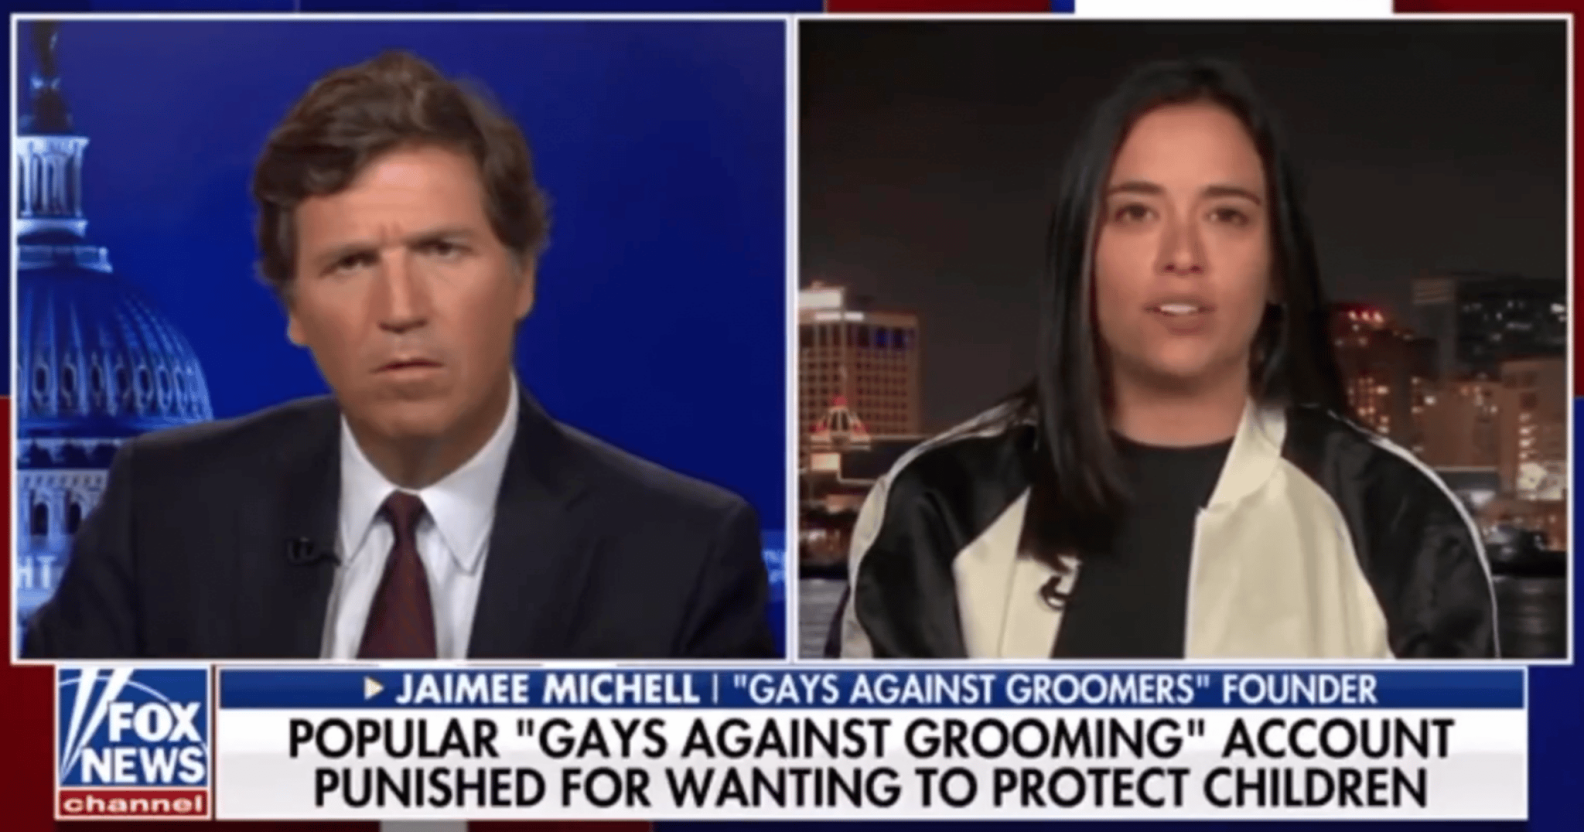 'Gays Against Groomers' founder appears on Fox News after being banned by Twitter